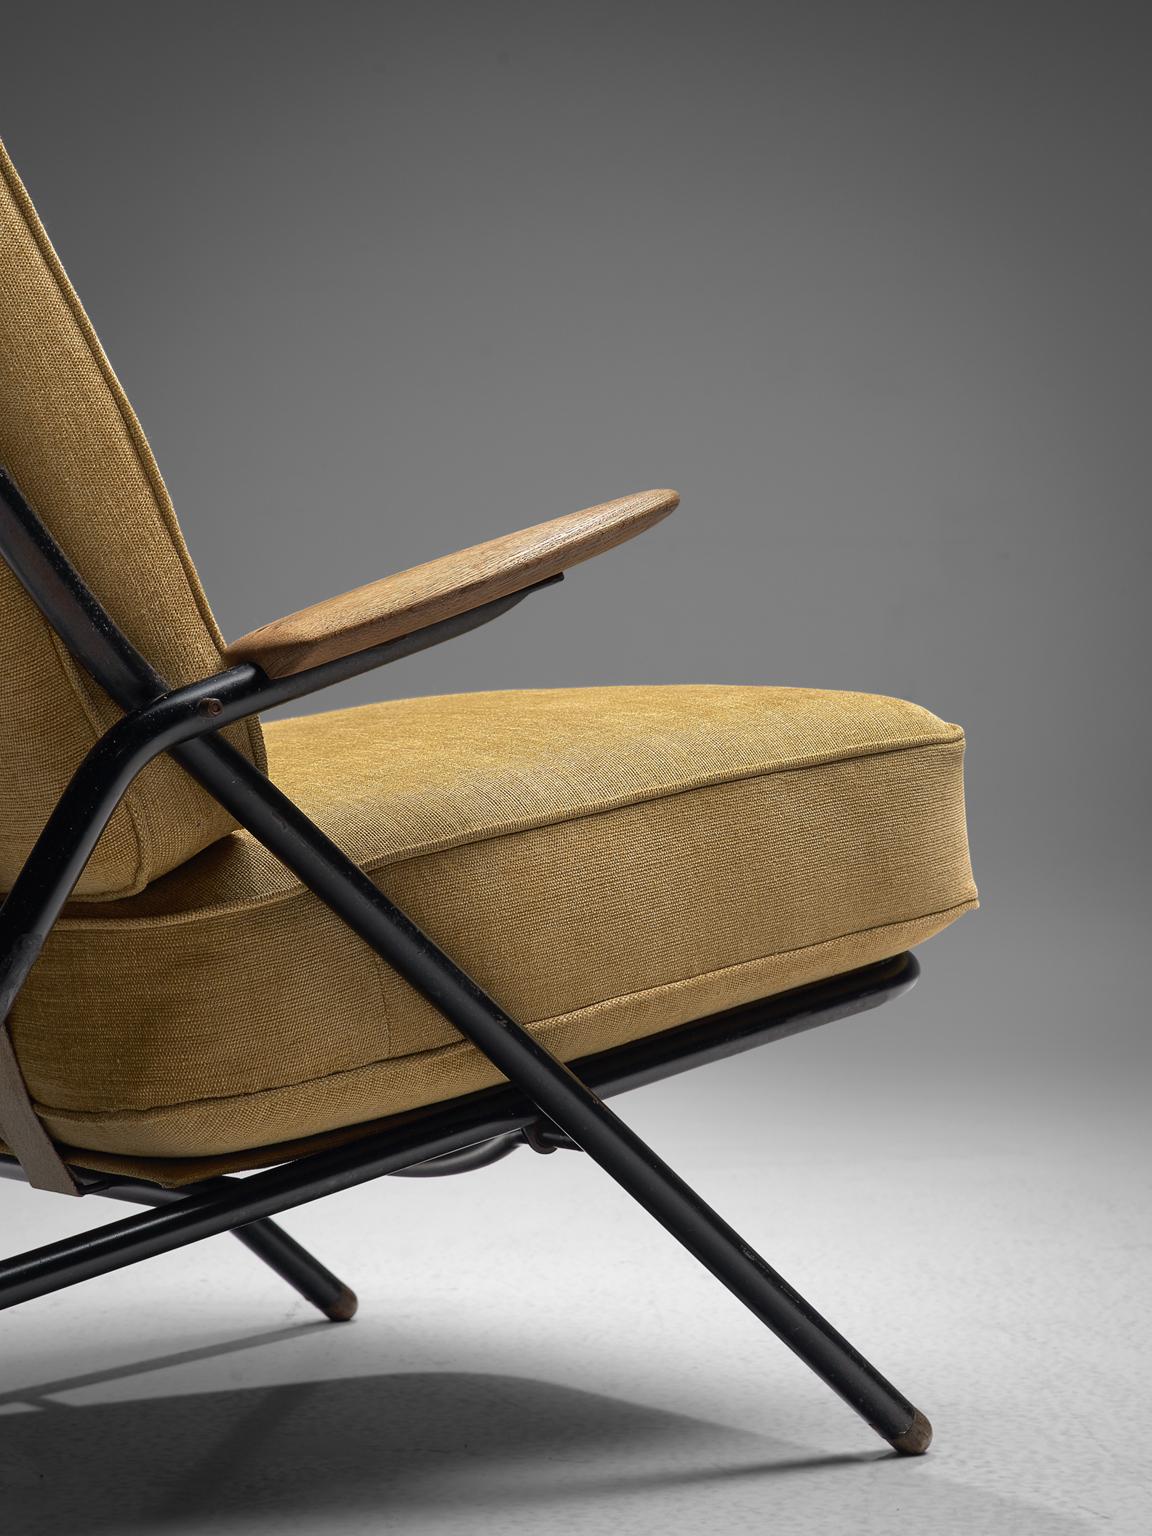 Mid-20th Century Hans J. Wegner Iconic Sawbuck Lounge Chair in Yellow Upholstery